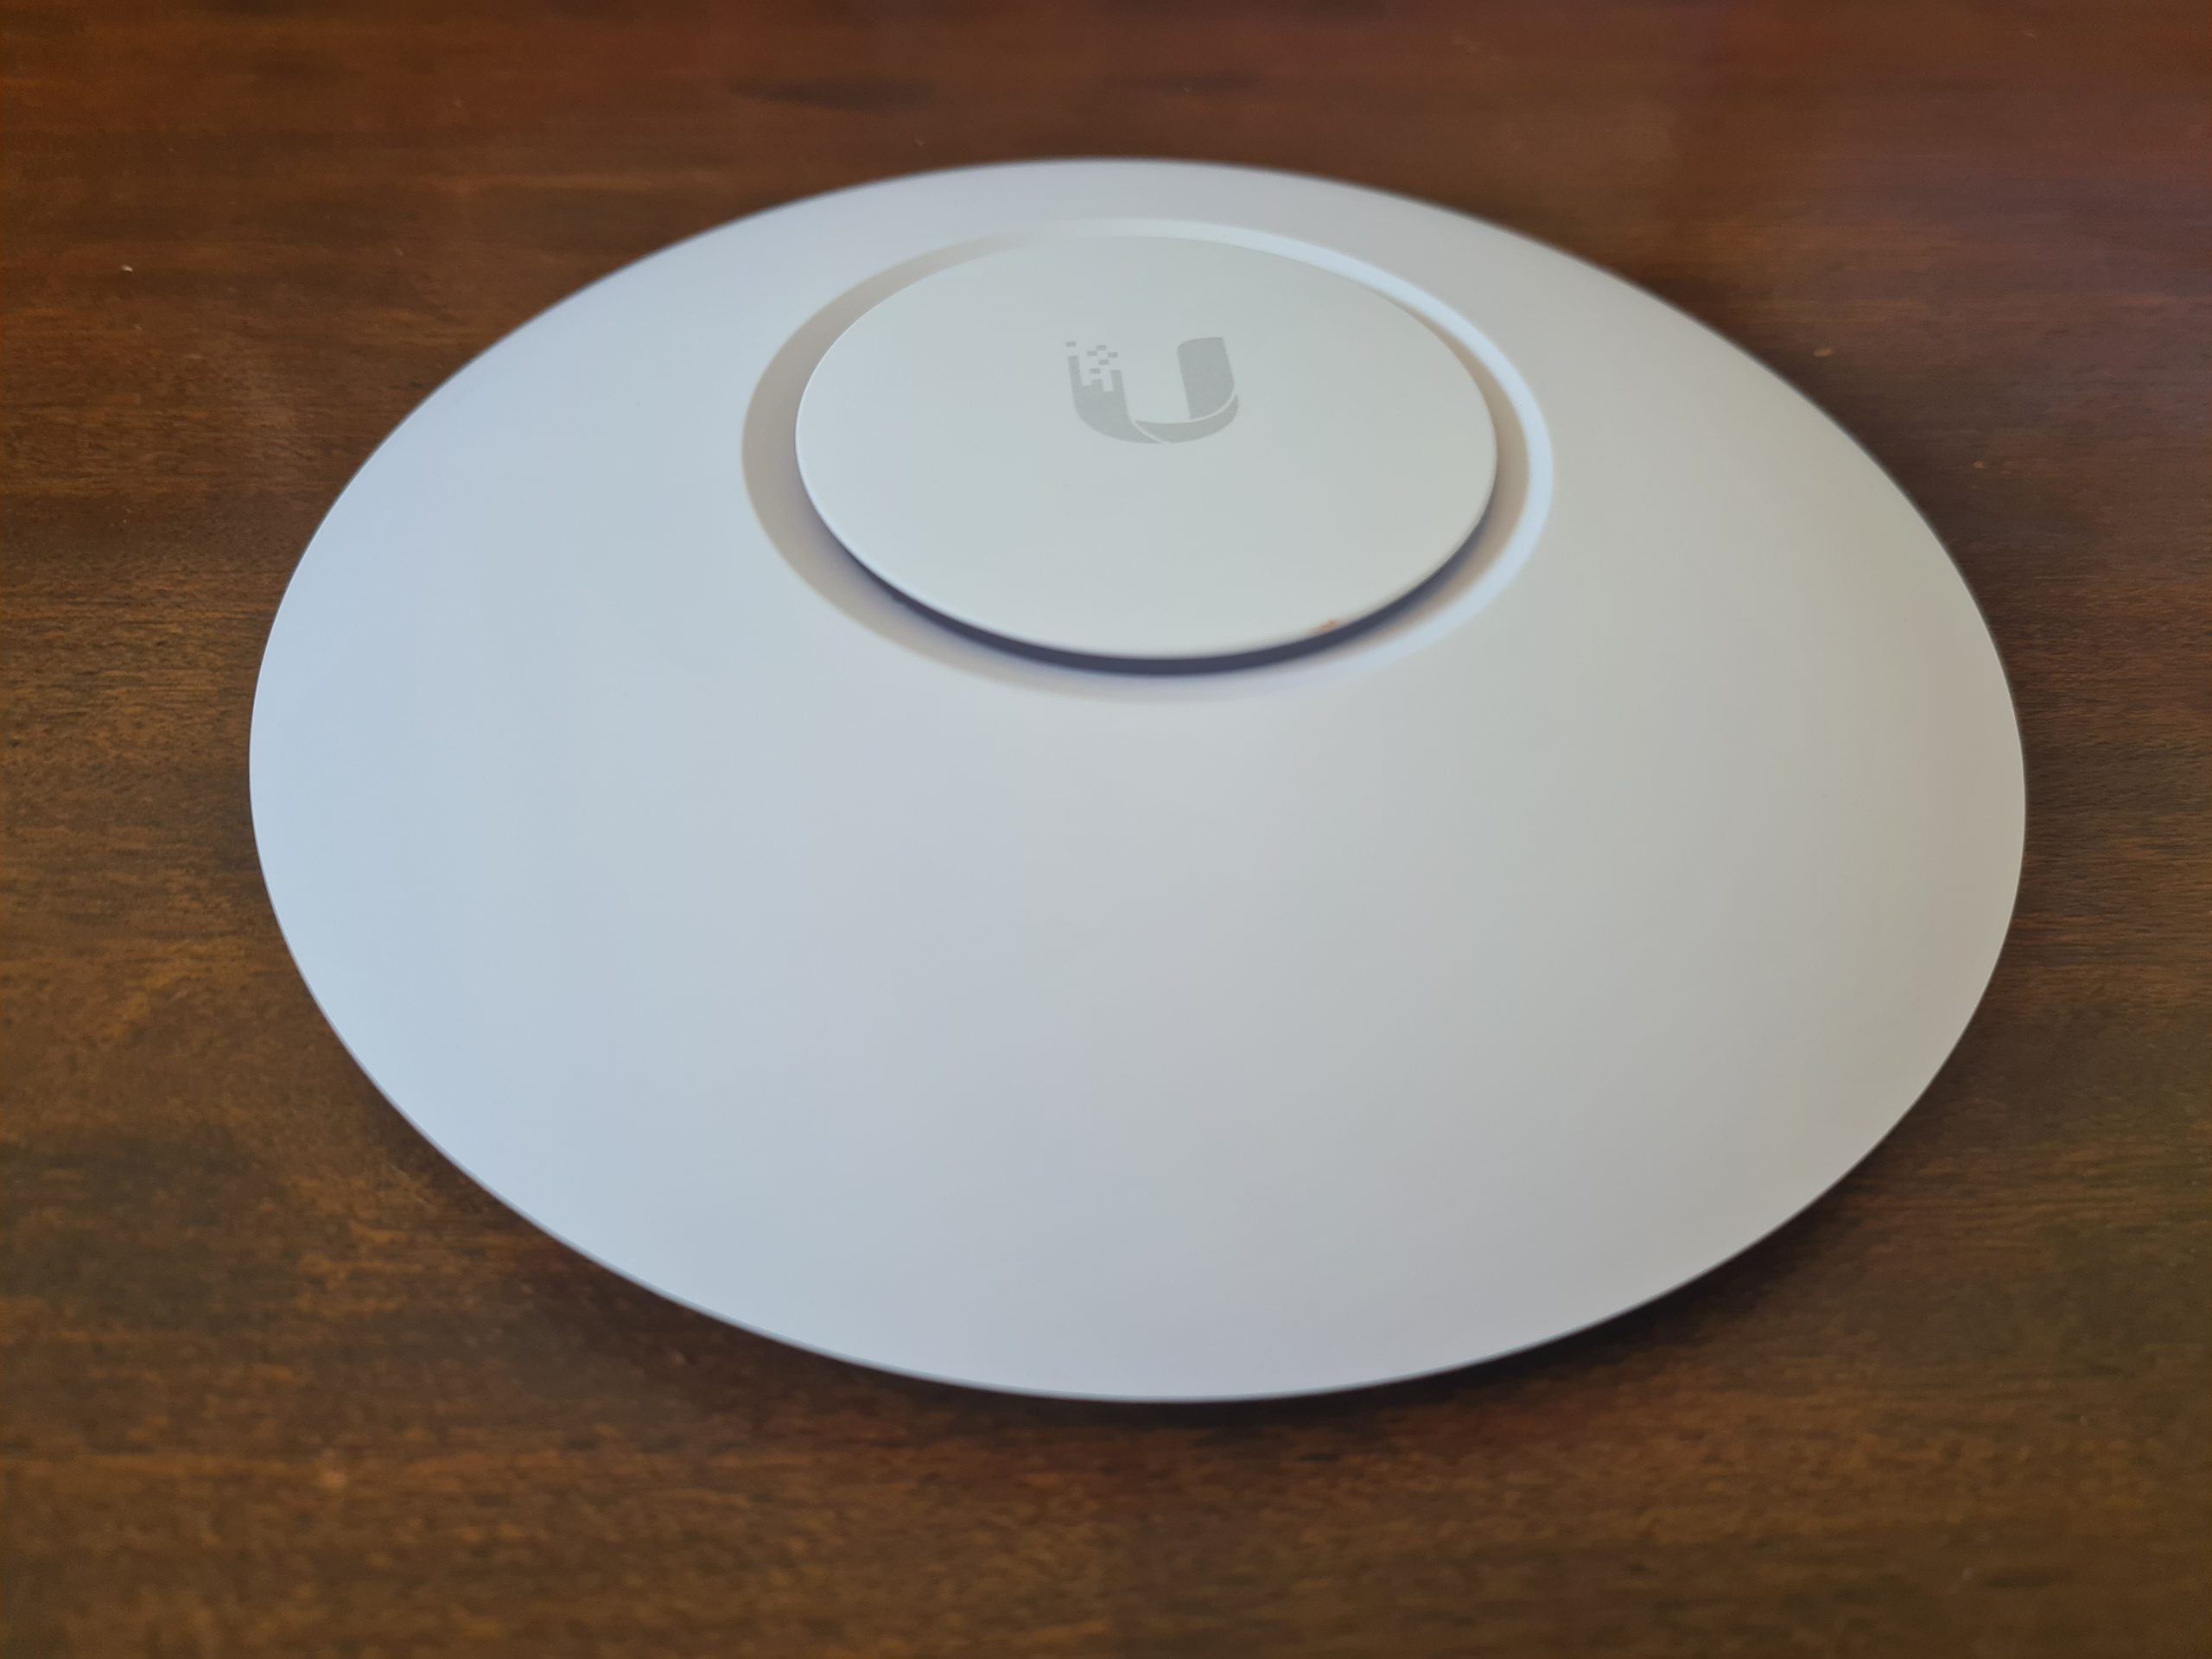 Unboxing and Testing the Ubiquiti UniFi Access Point AP-AC-Lite ...